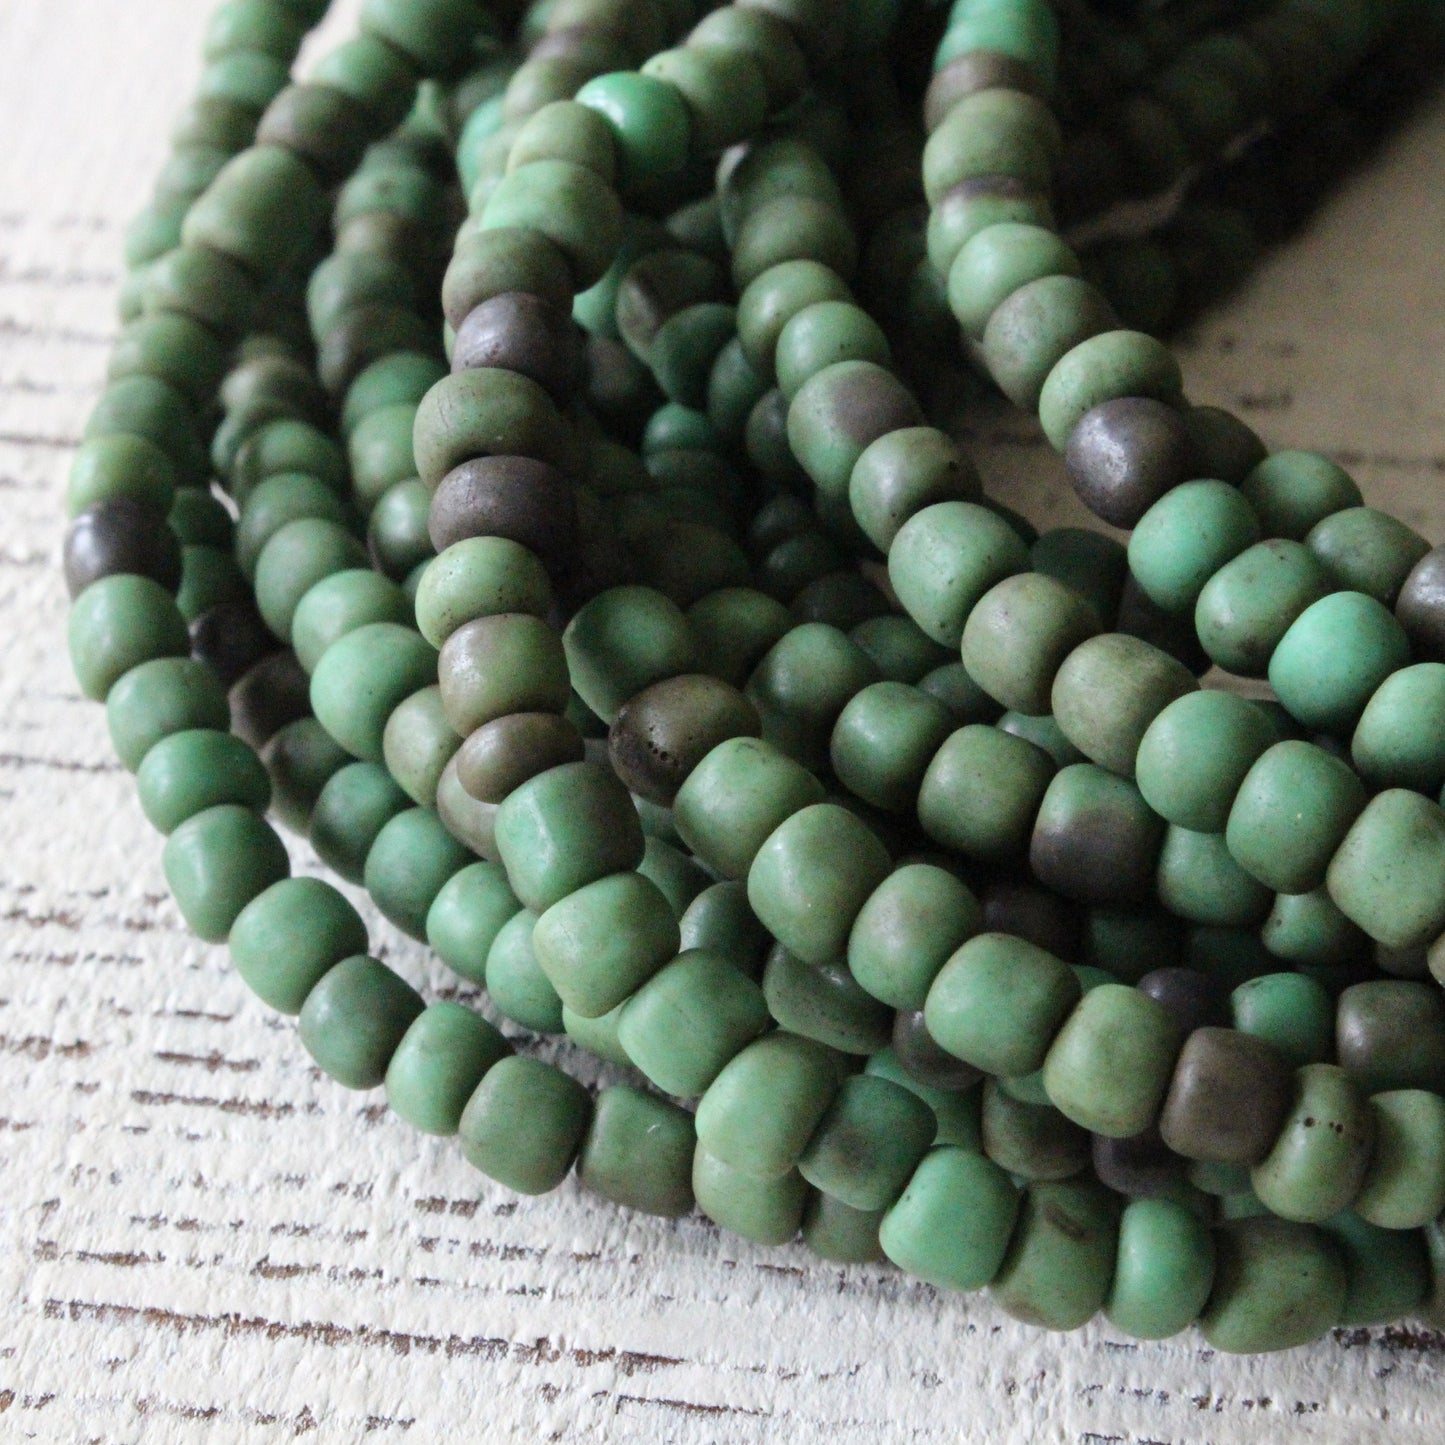 Rustic Indonesian Seed Beads - Dark Green Matte - 42 inches